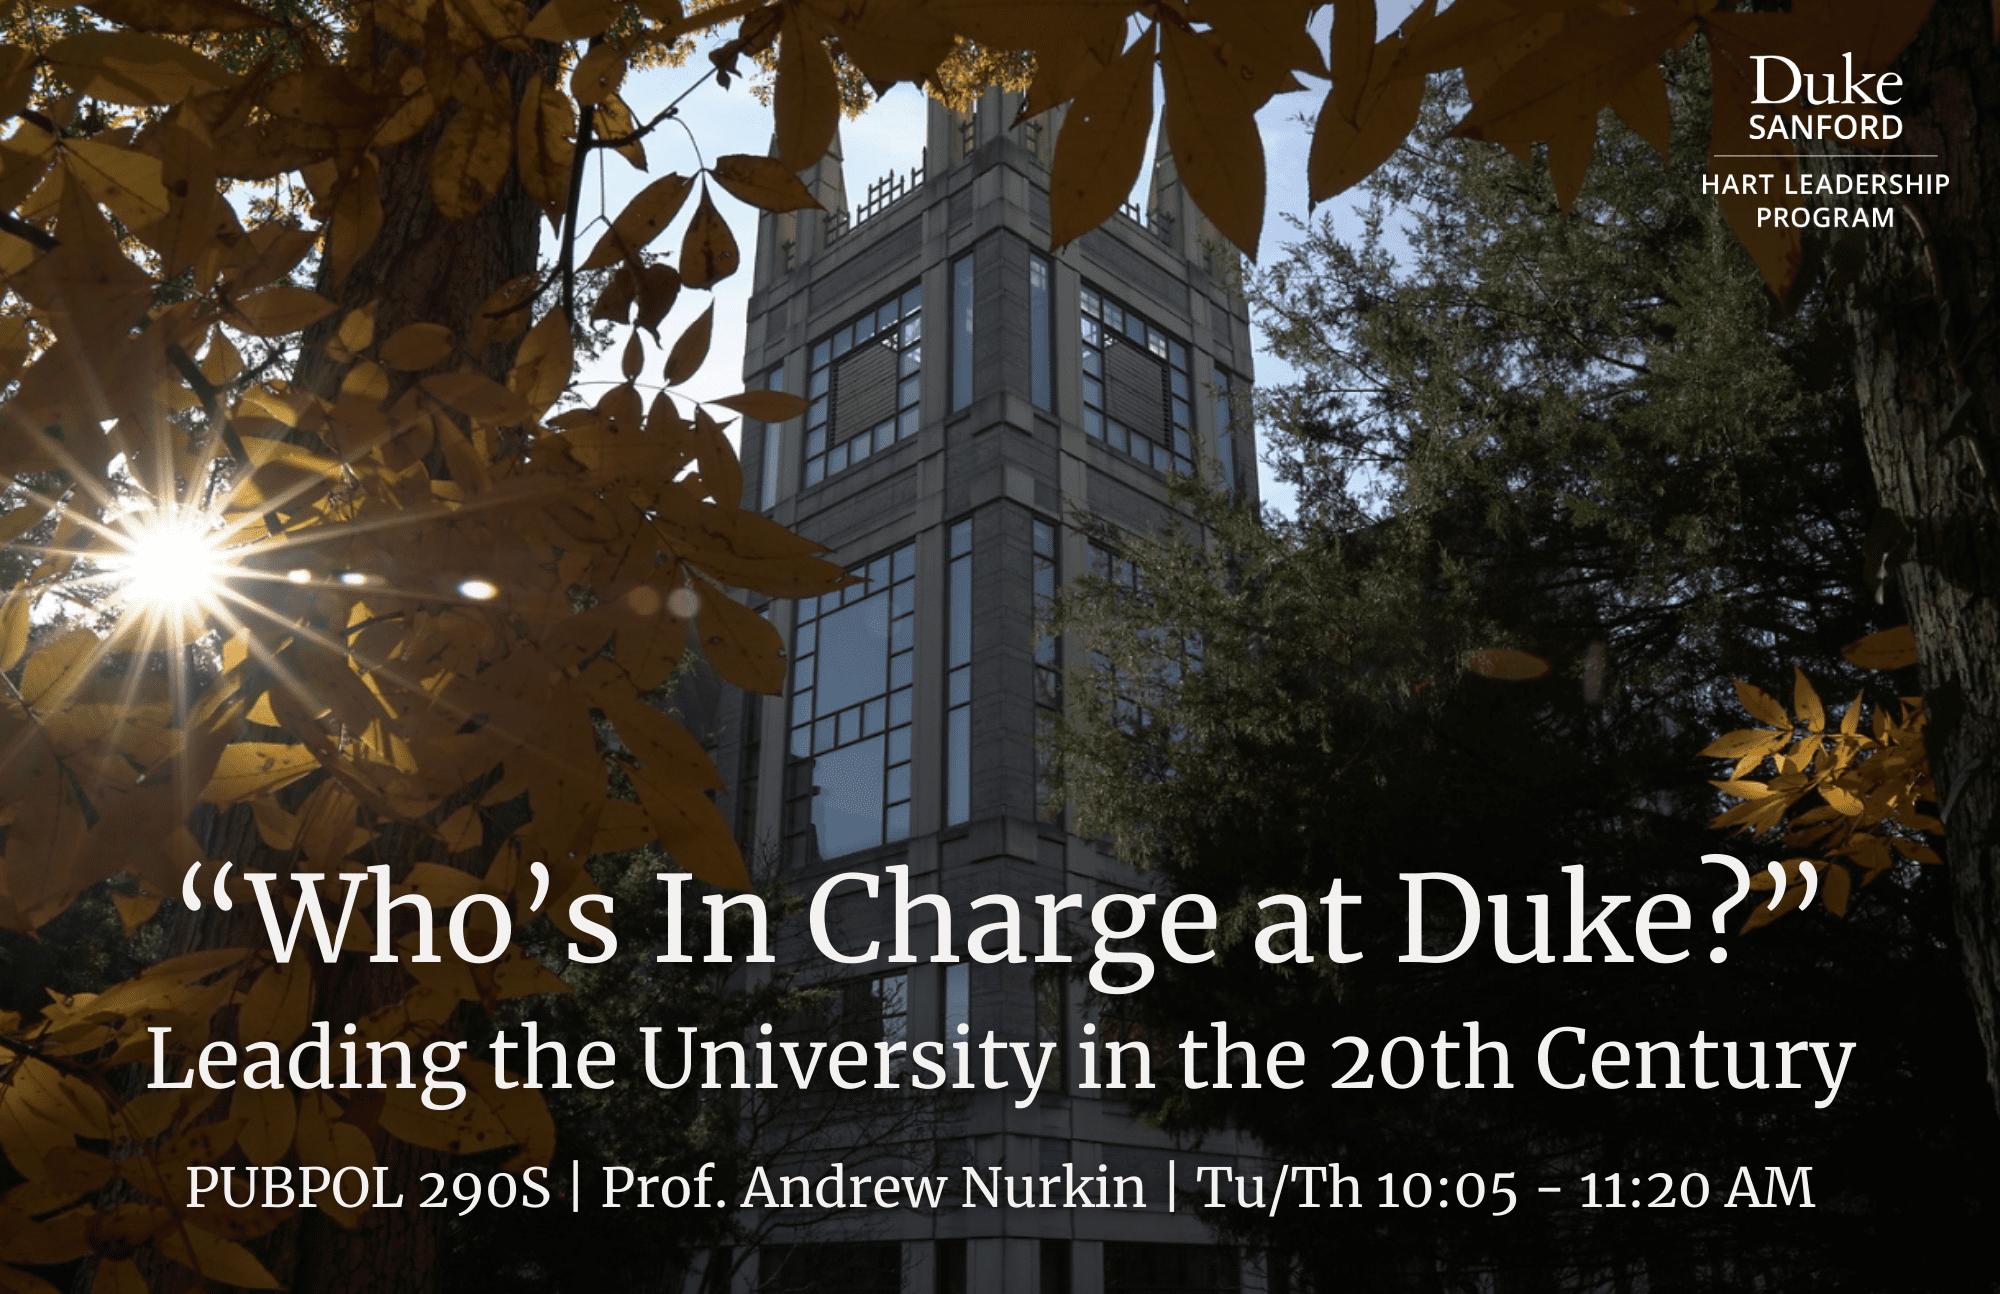 PubPol 290S: Whos in Charge at Duke? Leading the University in the 20th Century